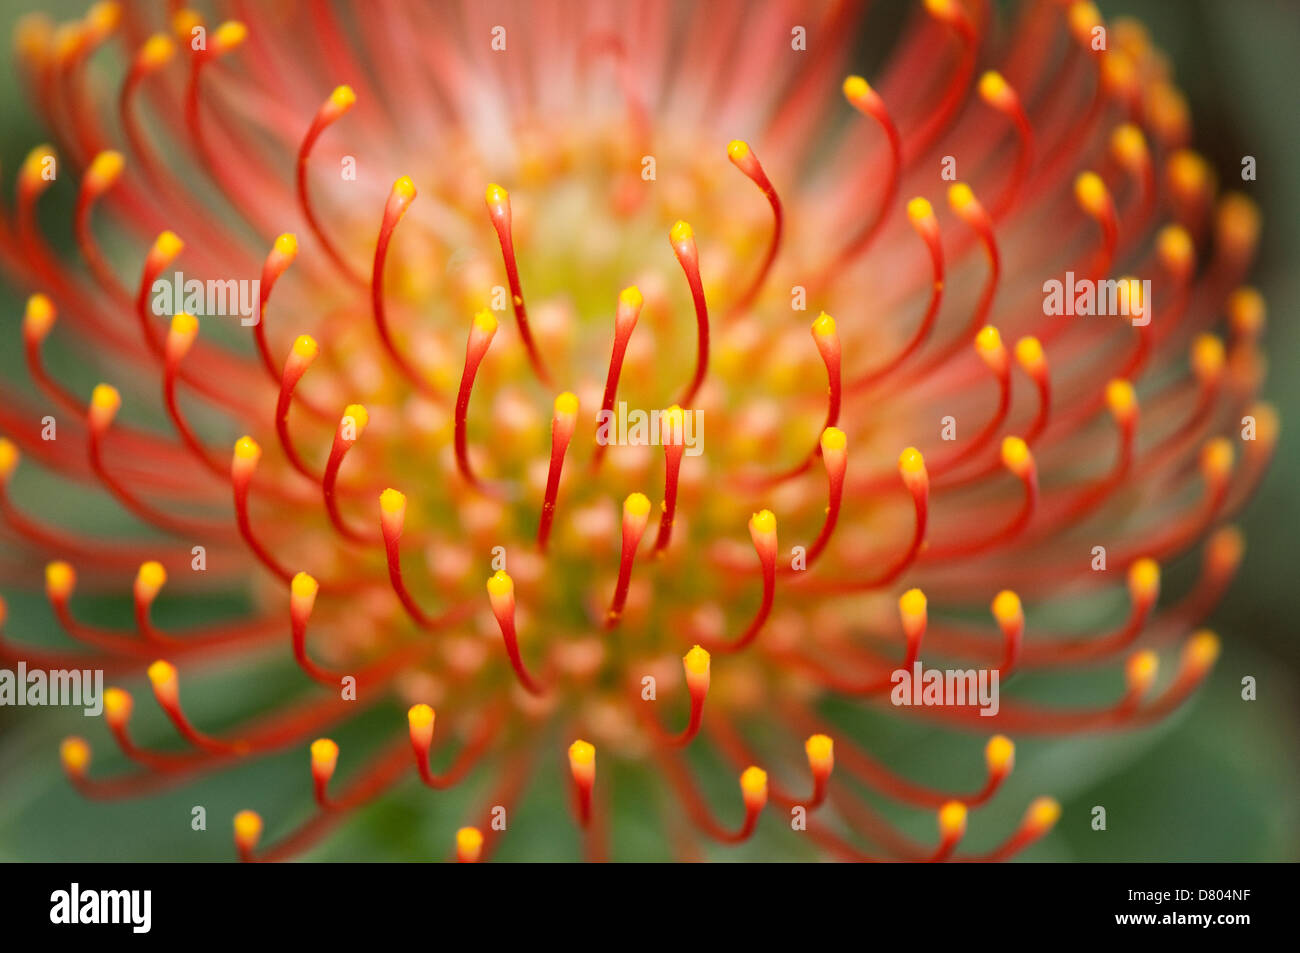 Close-up 'macro' image showing a Protea flower head, (spider or pin cushion flower). Stock Photo